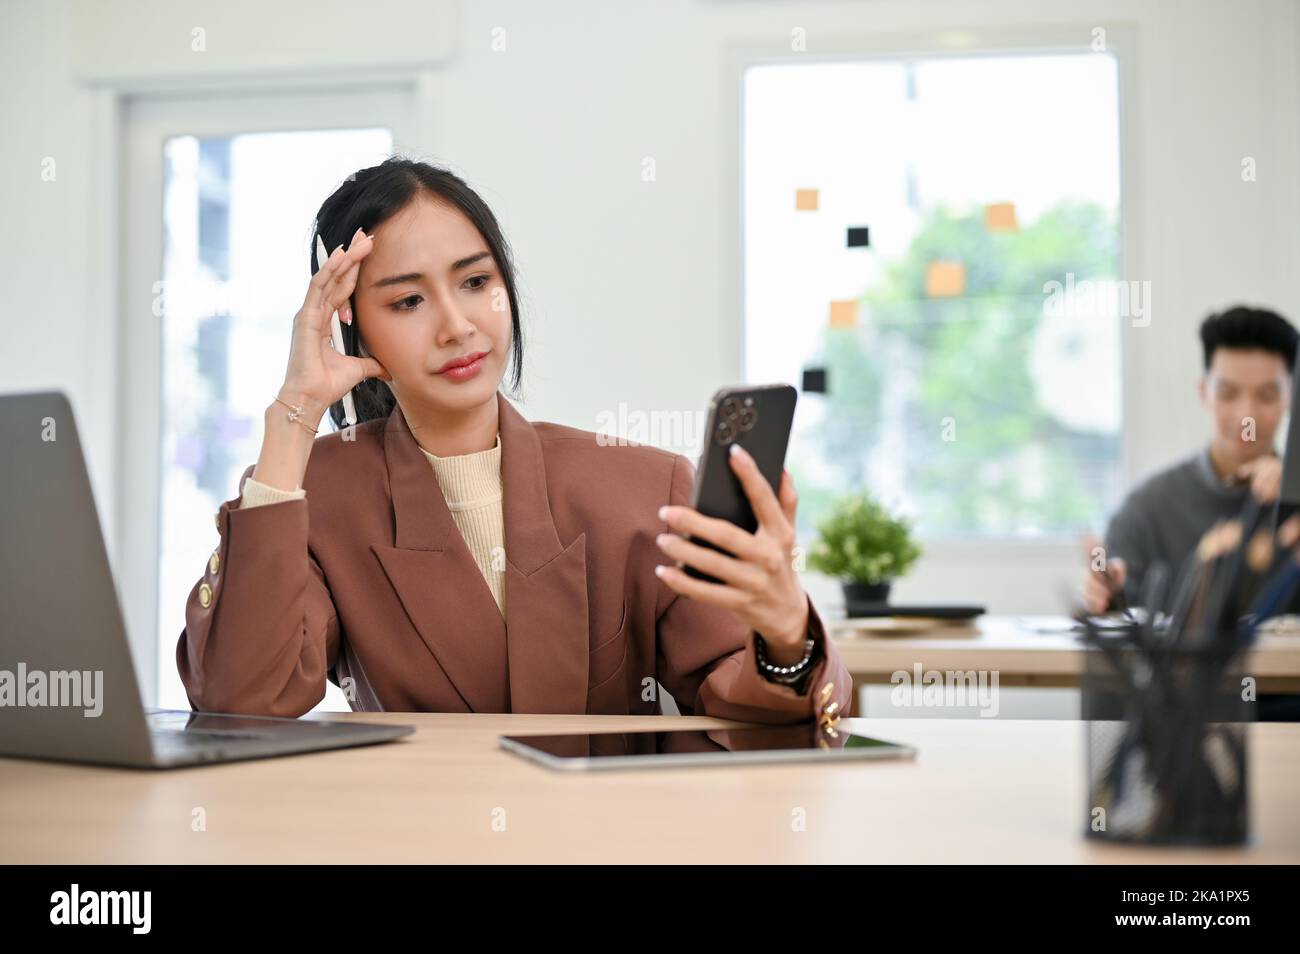 Phone, thinking and man by office window for career inspiration, job search  or online networking. Contemplating asian person or young entrepreneur  cellphone, smartphone or mobile app in workplace Stock Photo